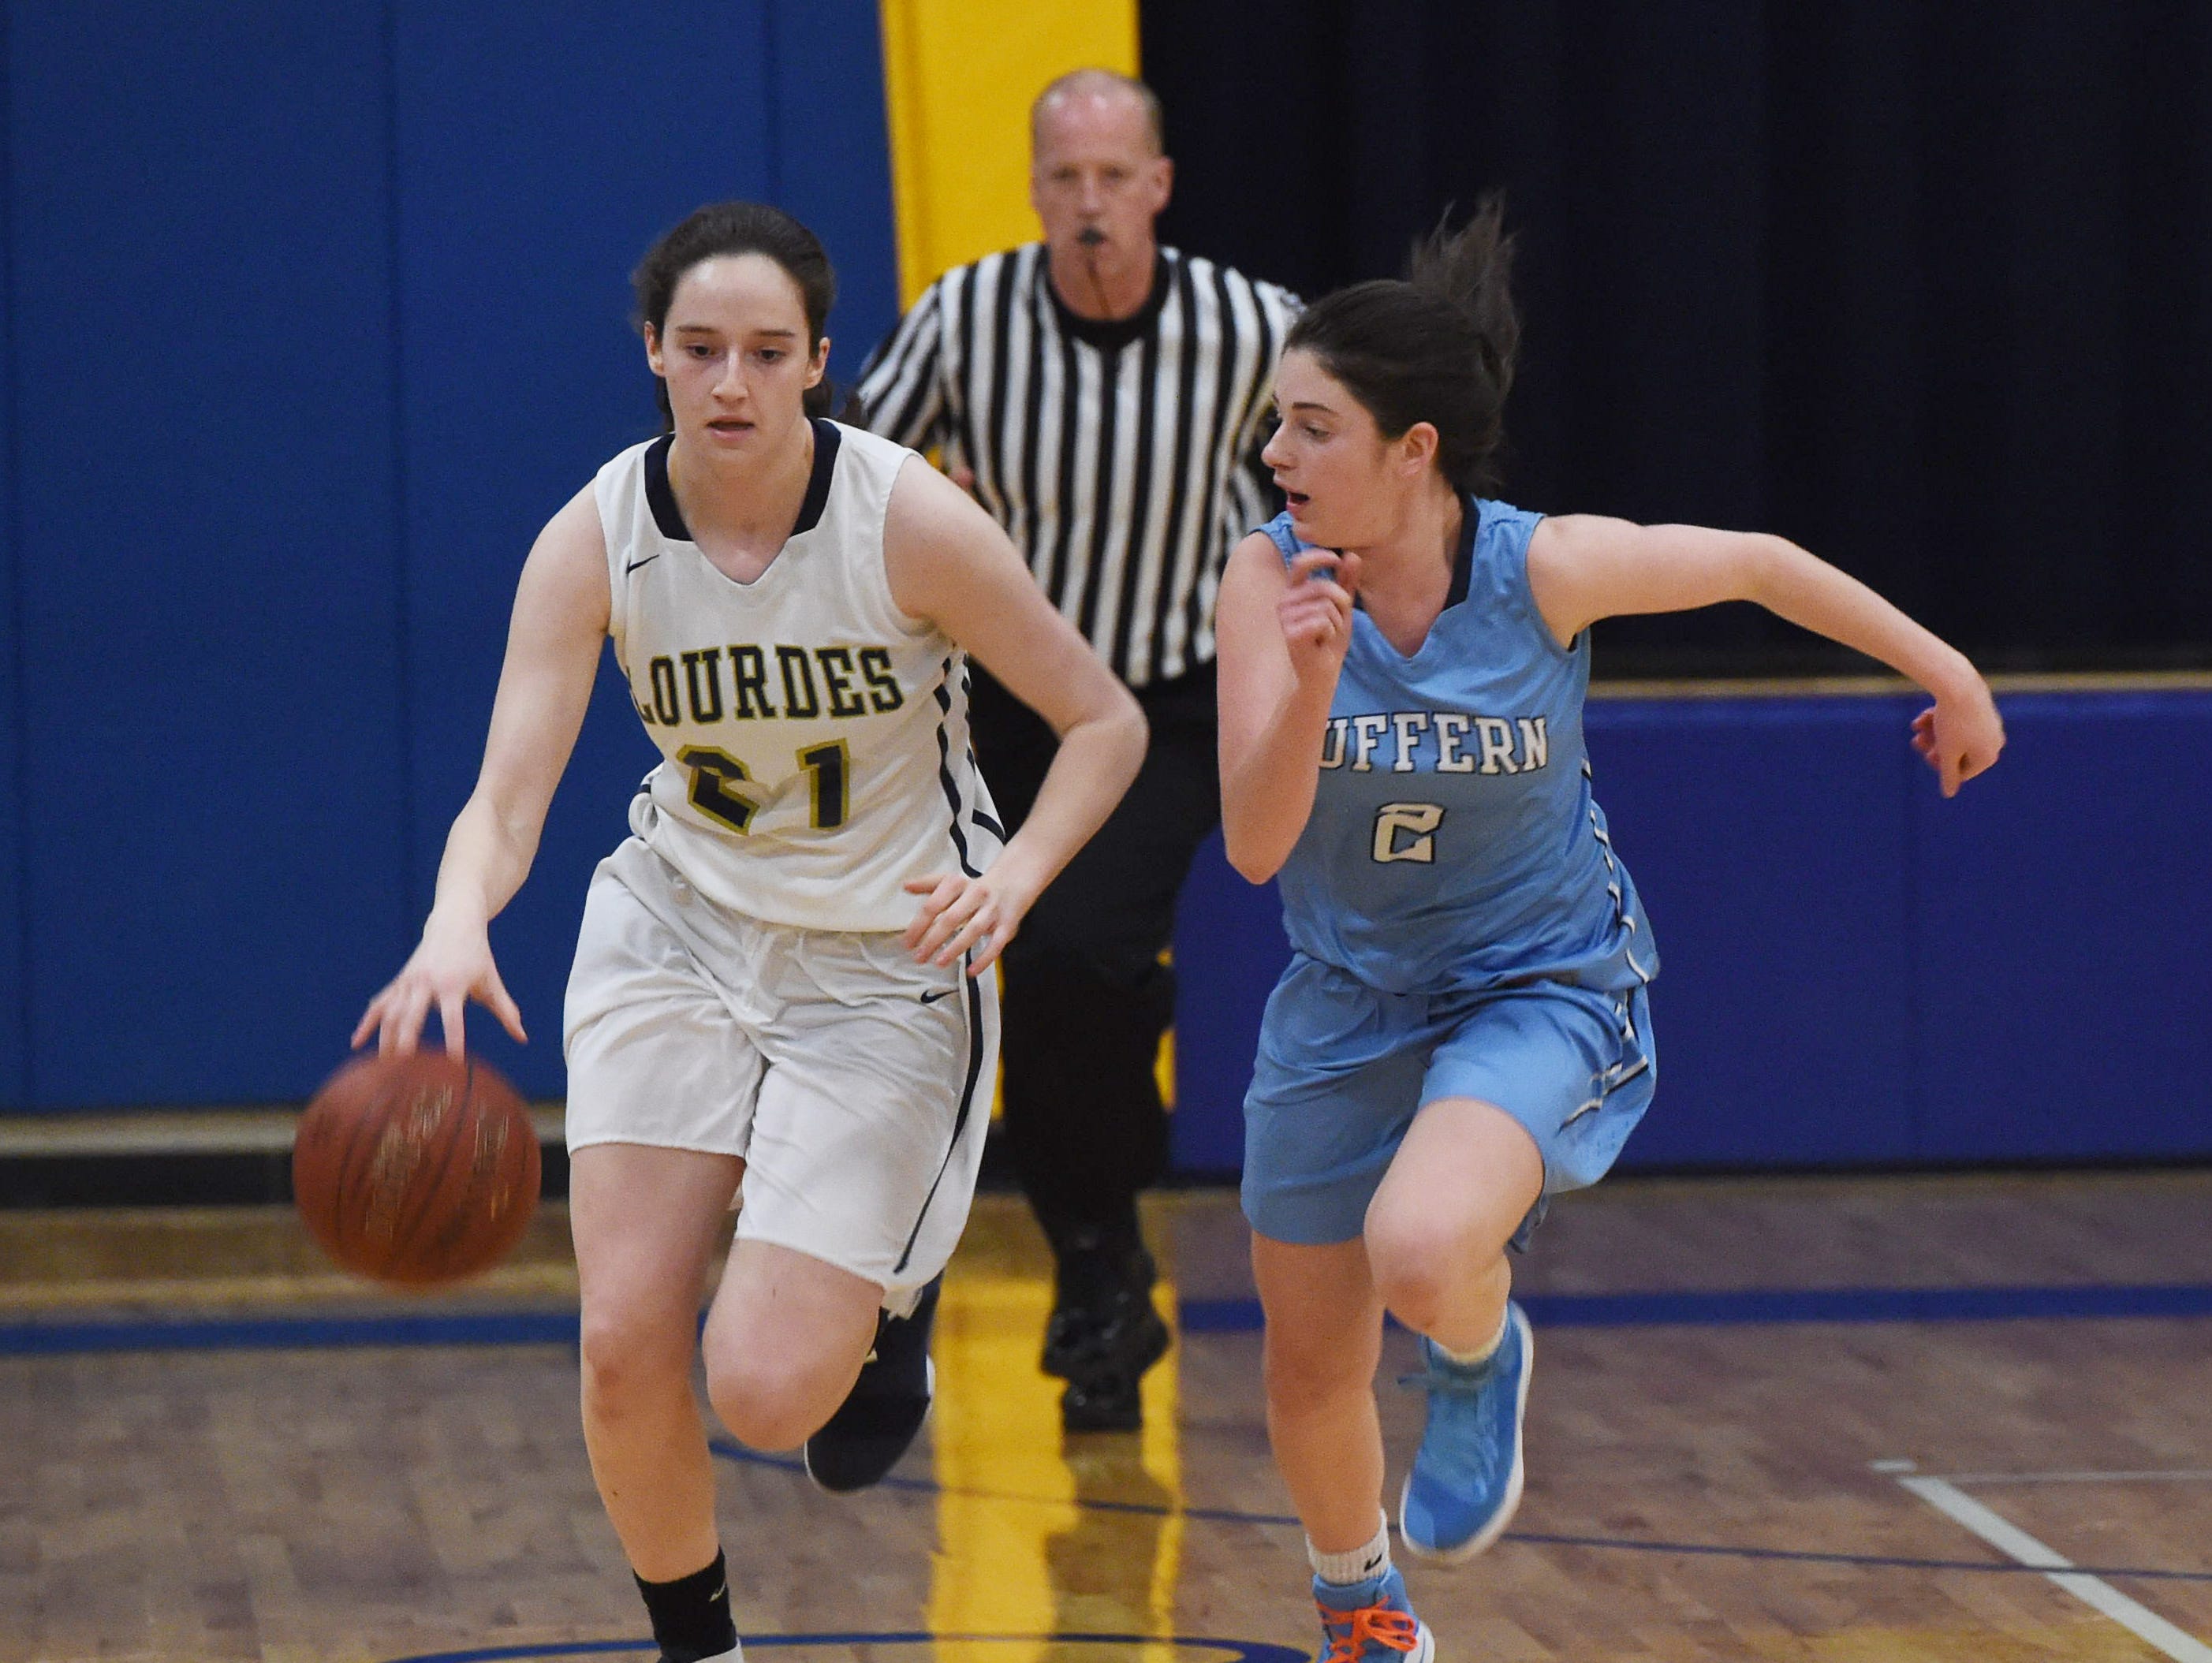 Lourdes' Daniela Valdez, left, takes the ball down the court as Suffern's Allie Goldstein, right, defends during Friday's game.